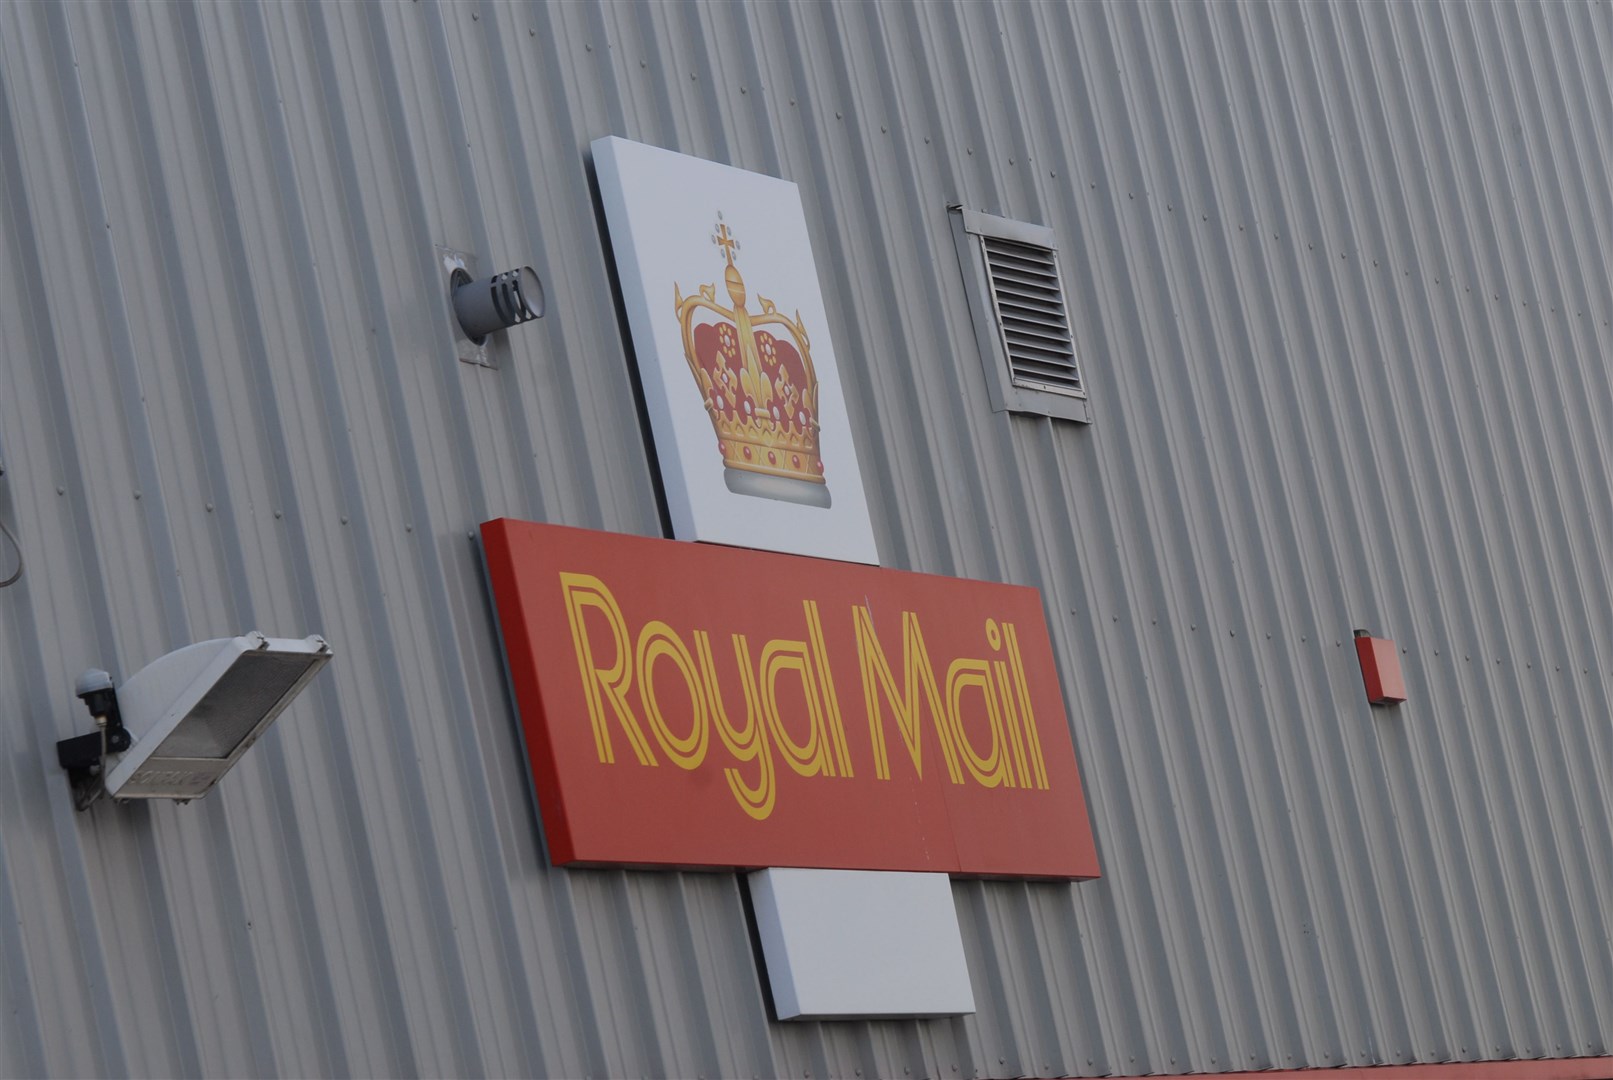 Union representatives have warned that Royal Mail postal services are nearing 'breaking point' in the Highlands.